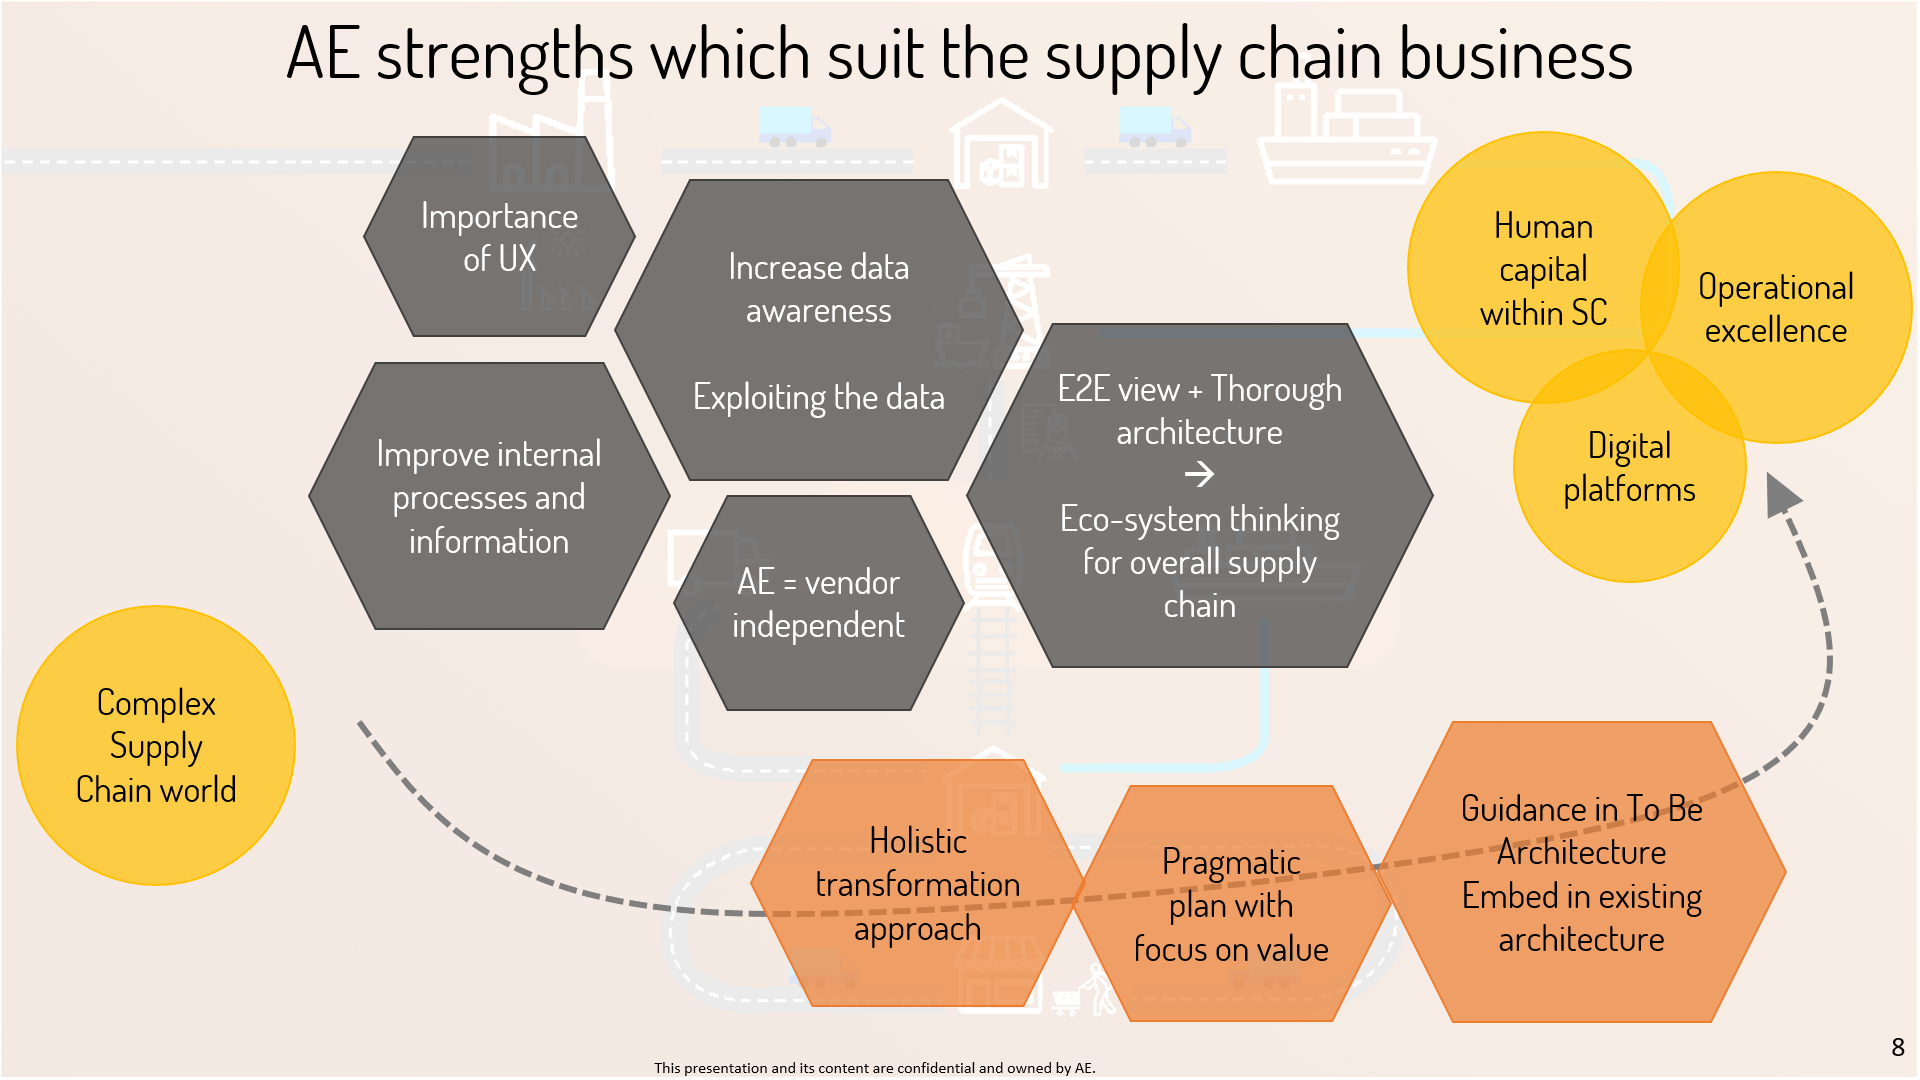 AE strengths suit complex supply chain business-1